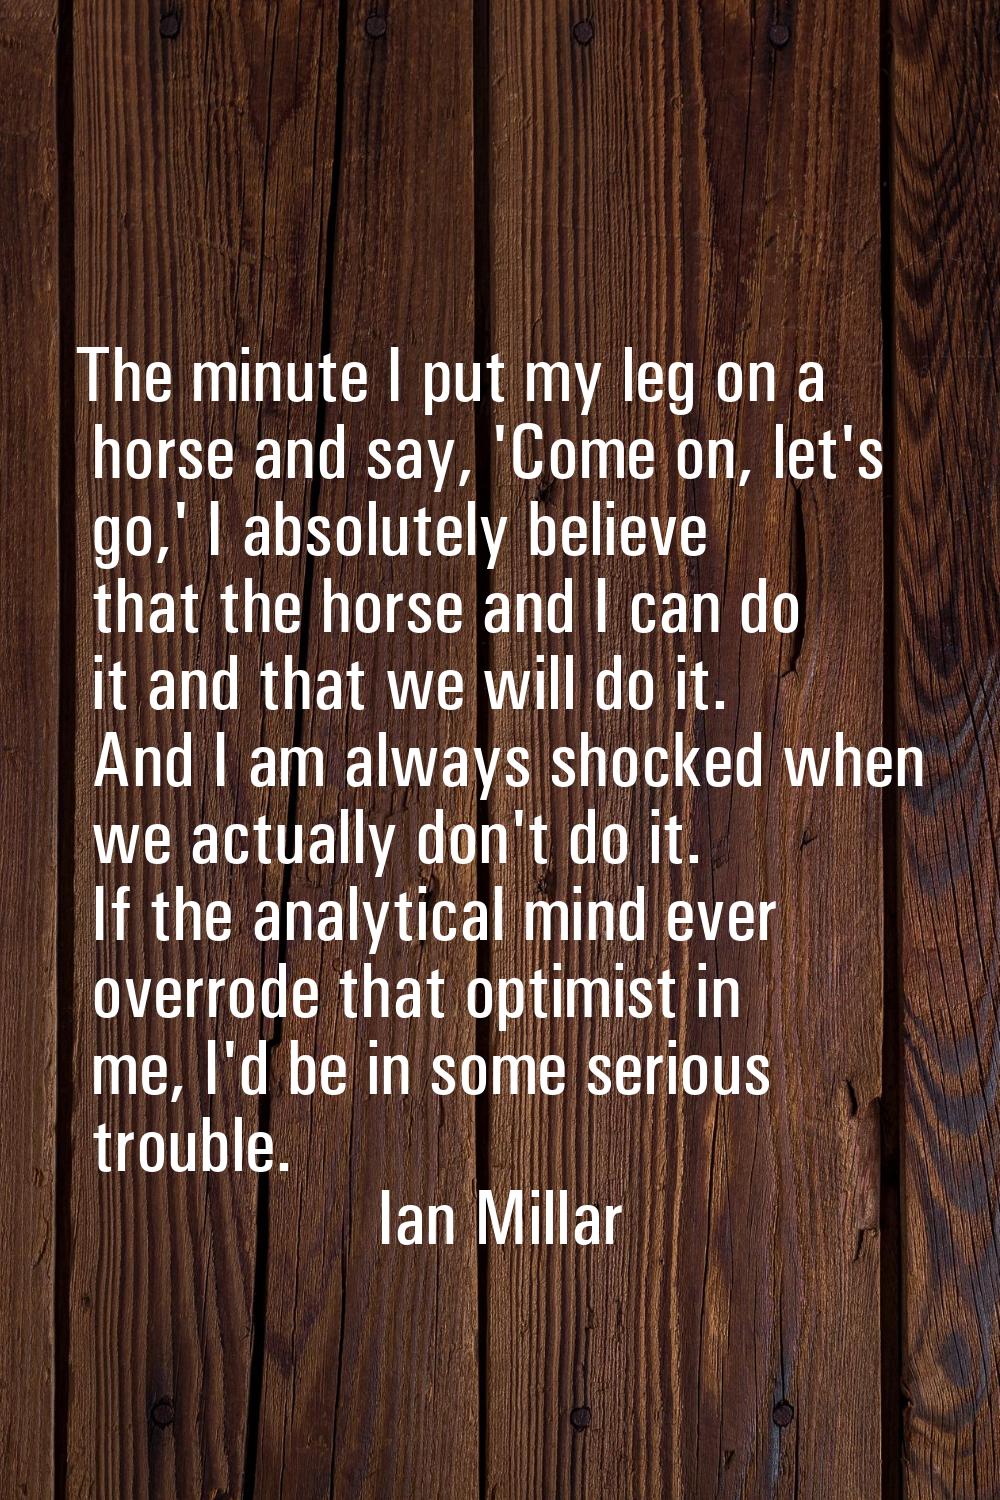 The minute I put my leg on a horse and say, 'Come on, let's go,' I absolutely believe that the hors